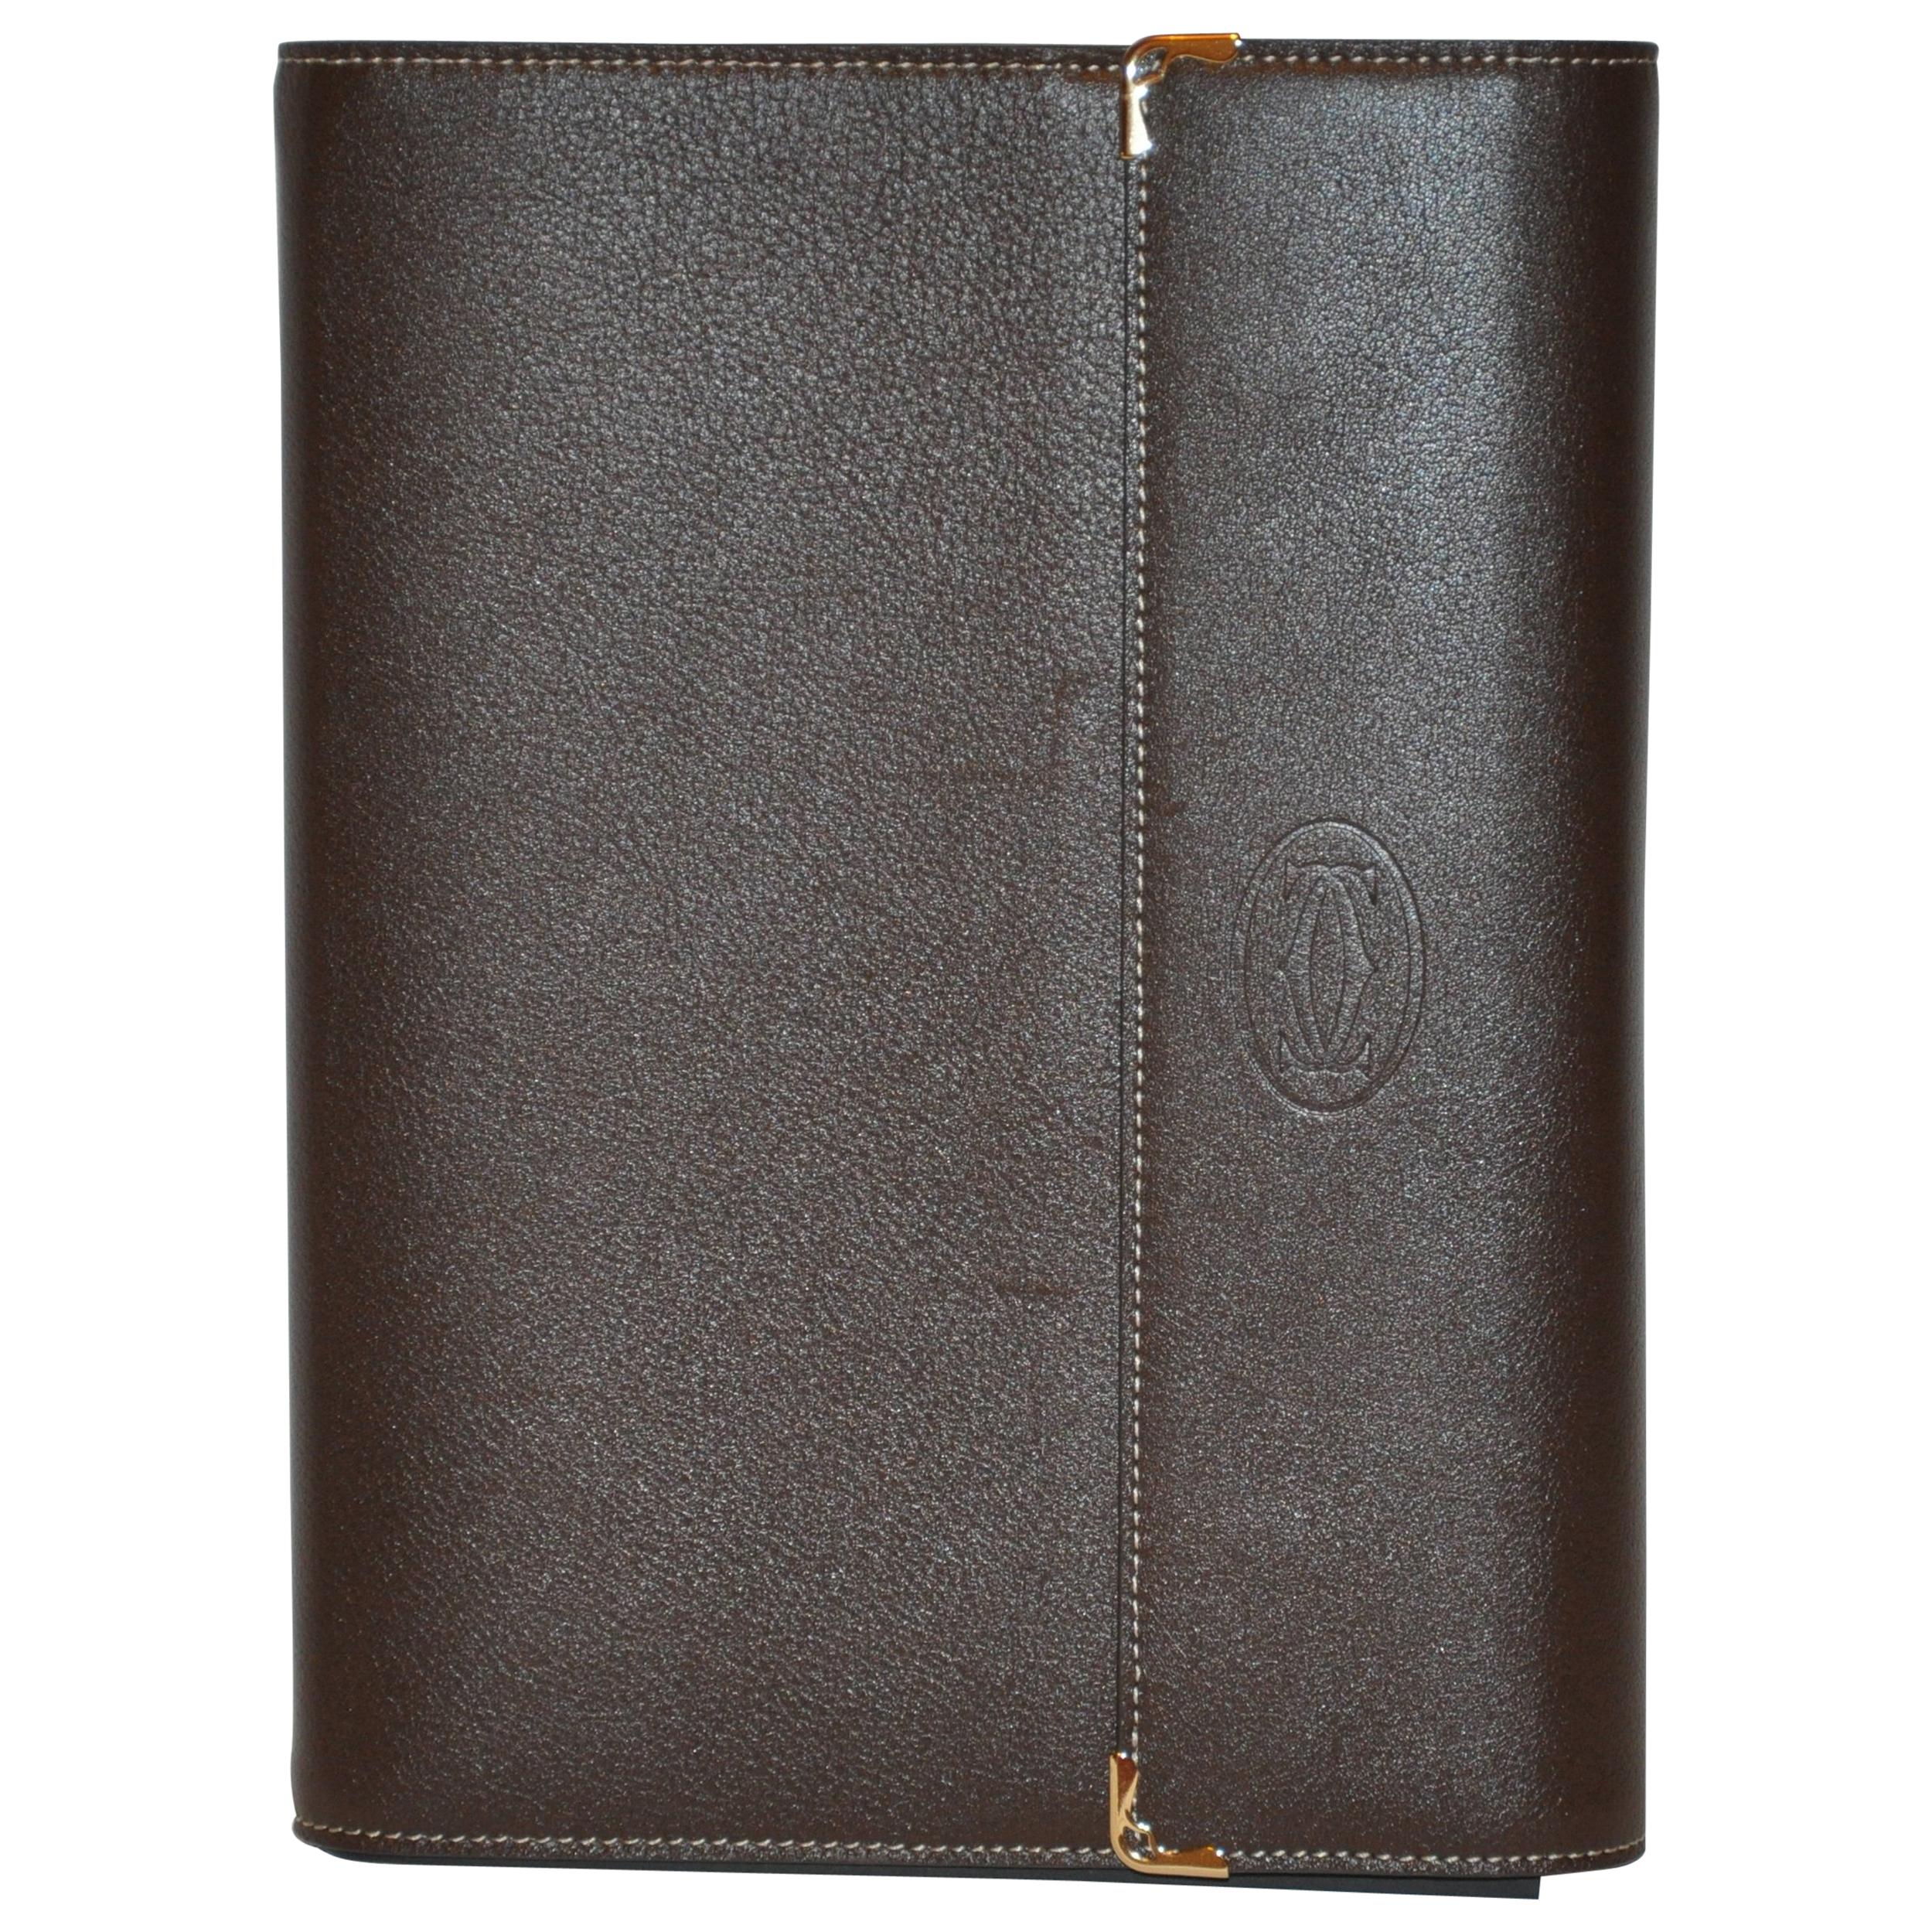 Cartier Signature Monogram Textured Coco-Brown & Gold Hardware Covered Notebook